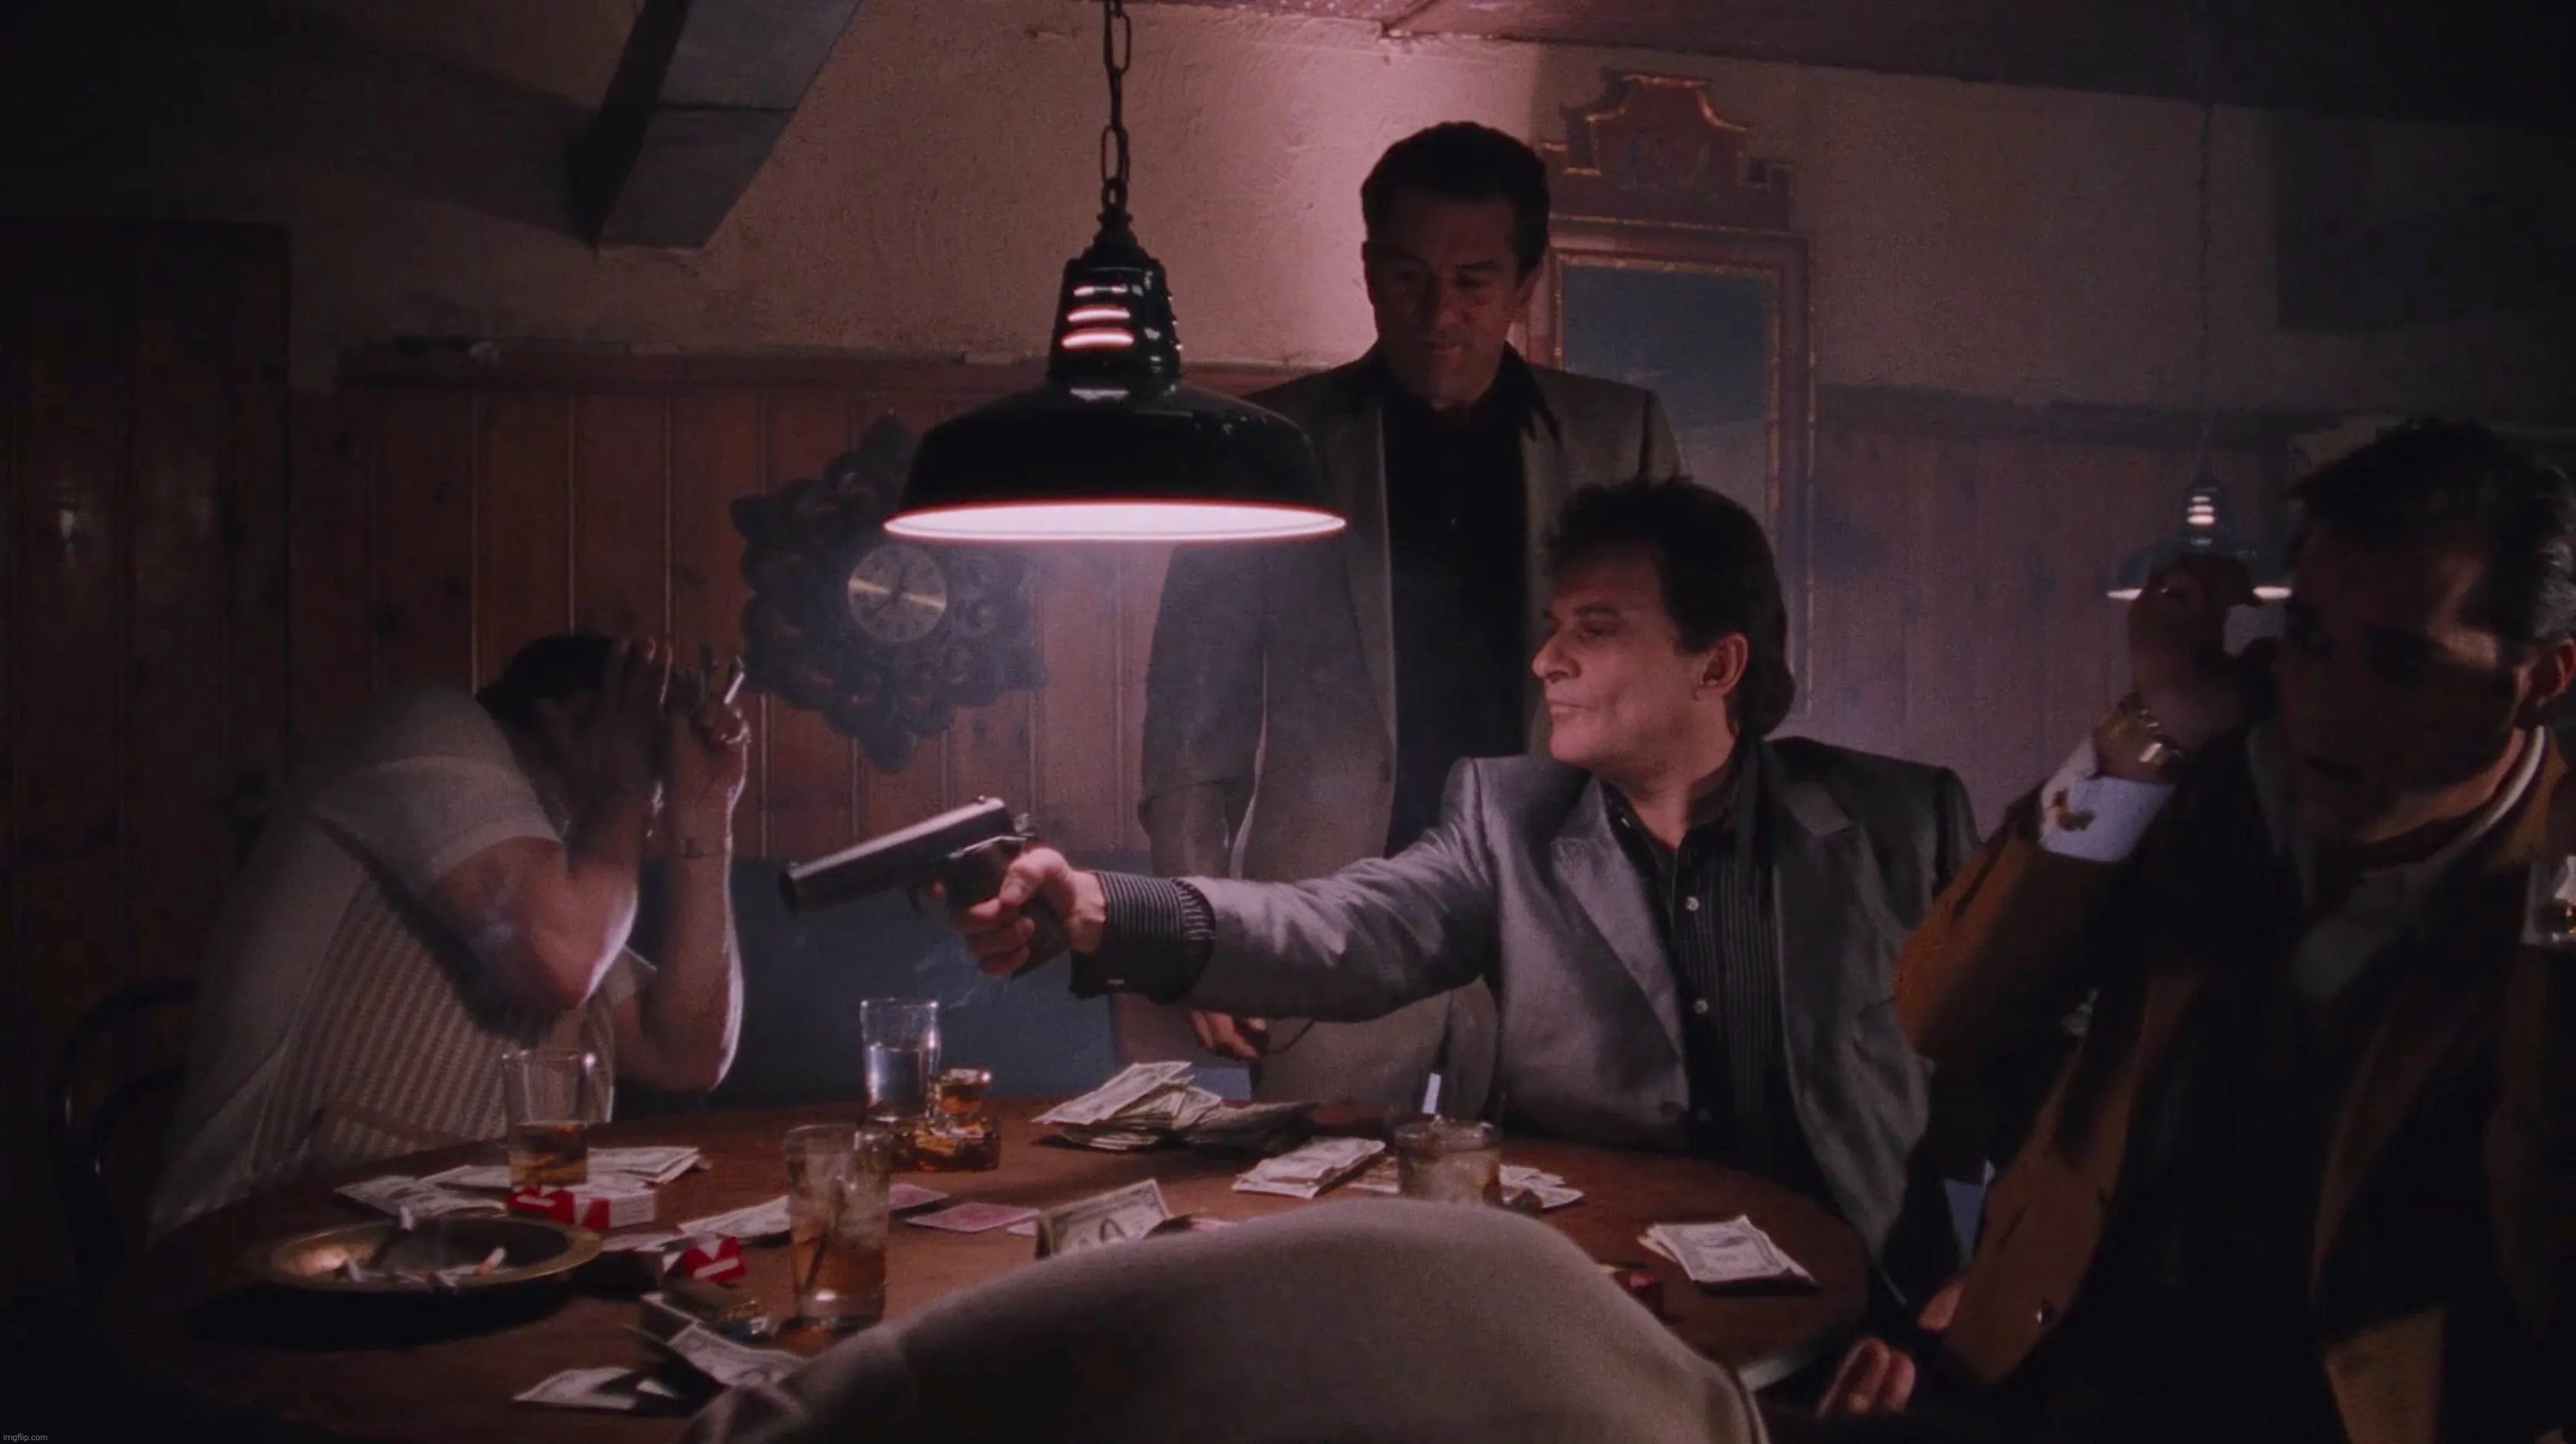 Tommy shoots spider | image tagged in goodfellas,tommy shoots spider,tommy,joe pesci | made w/ Imgflip meme maker